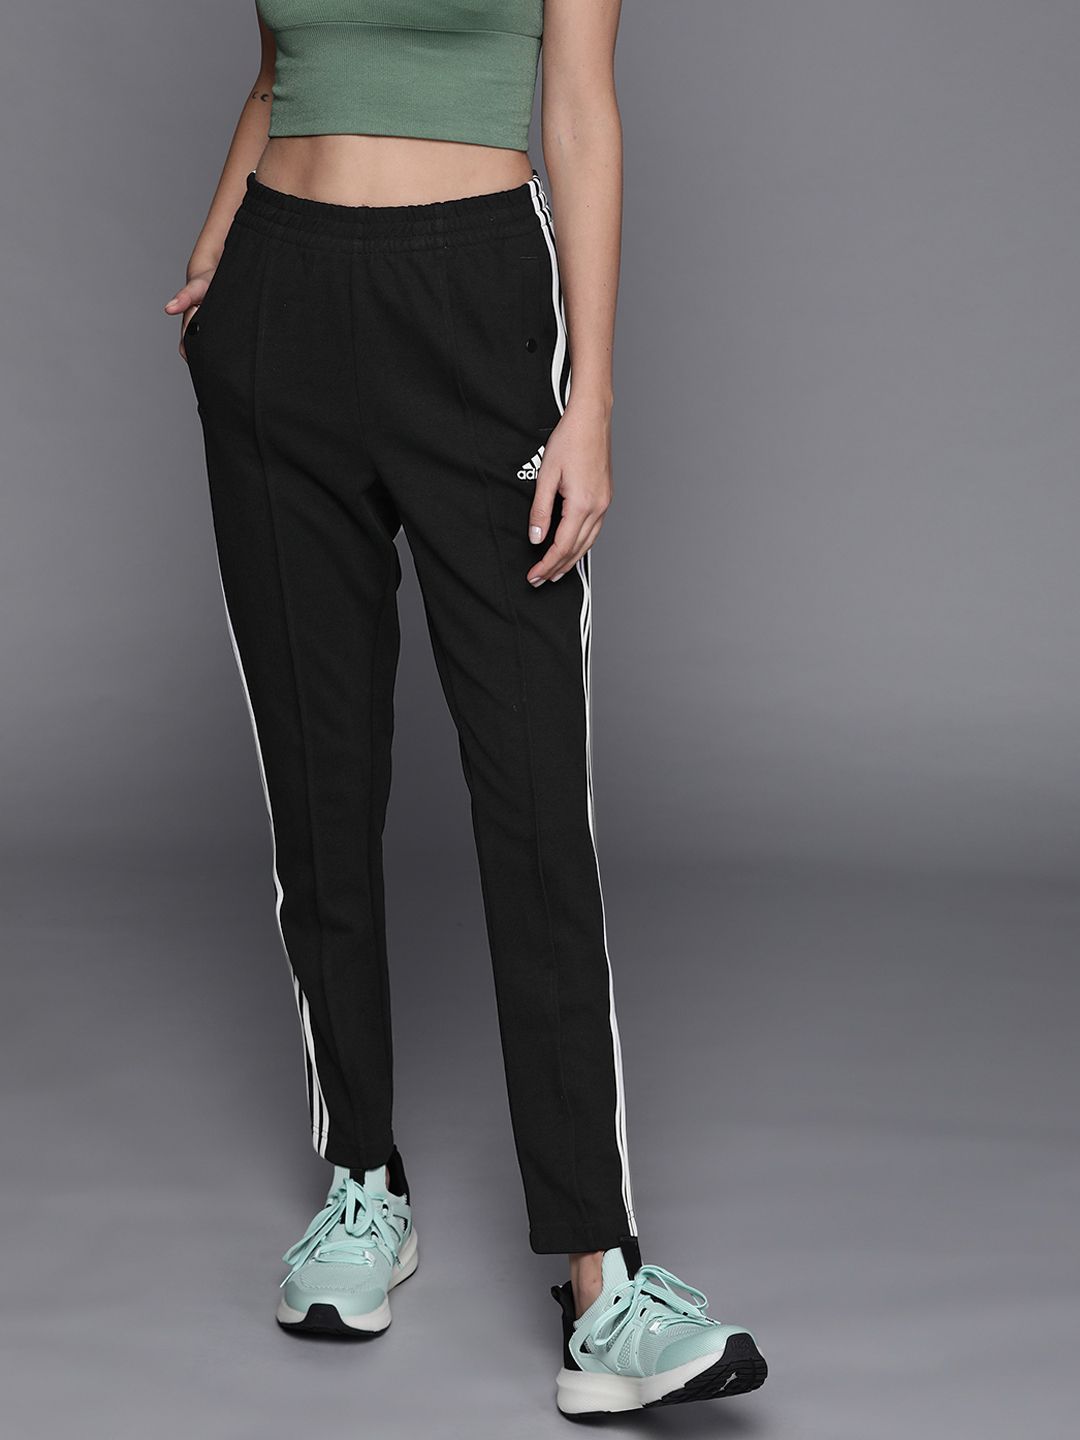 ADIDAS Women Black Solid Slim Fit Sustainable Snap Pants with Side Stripes Price in India